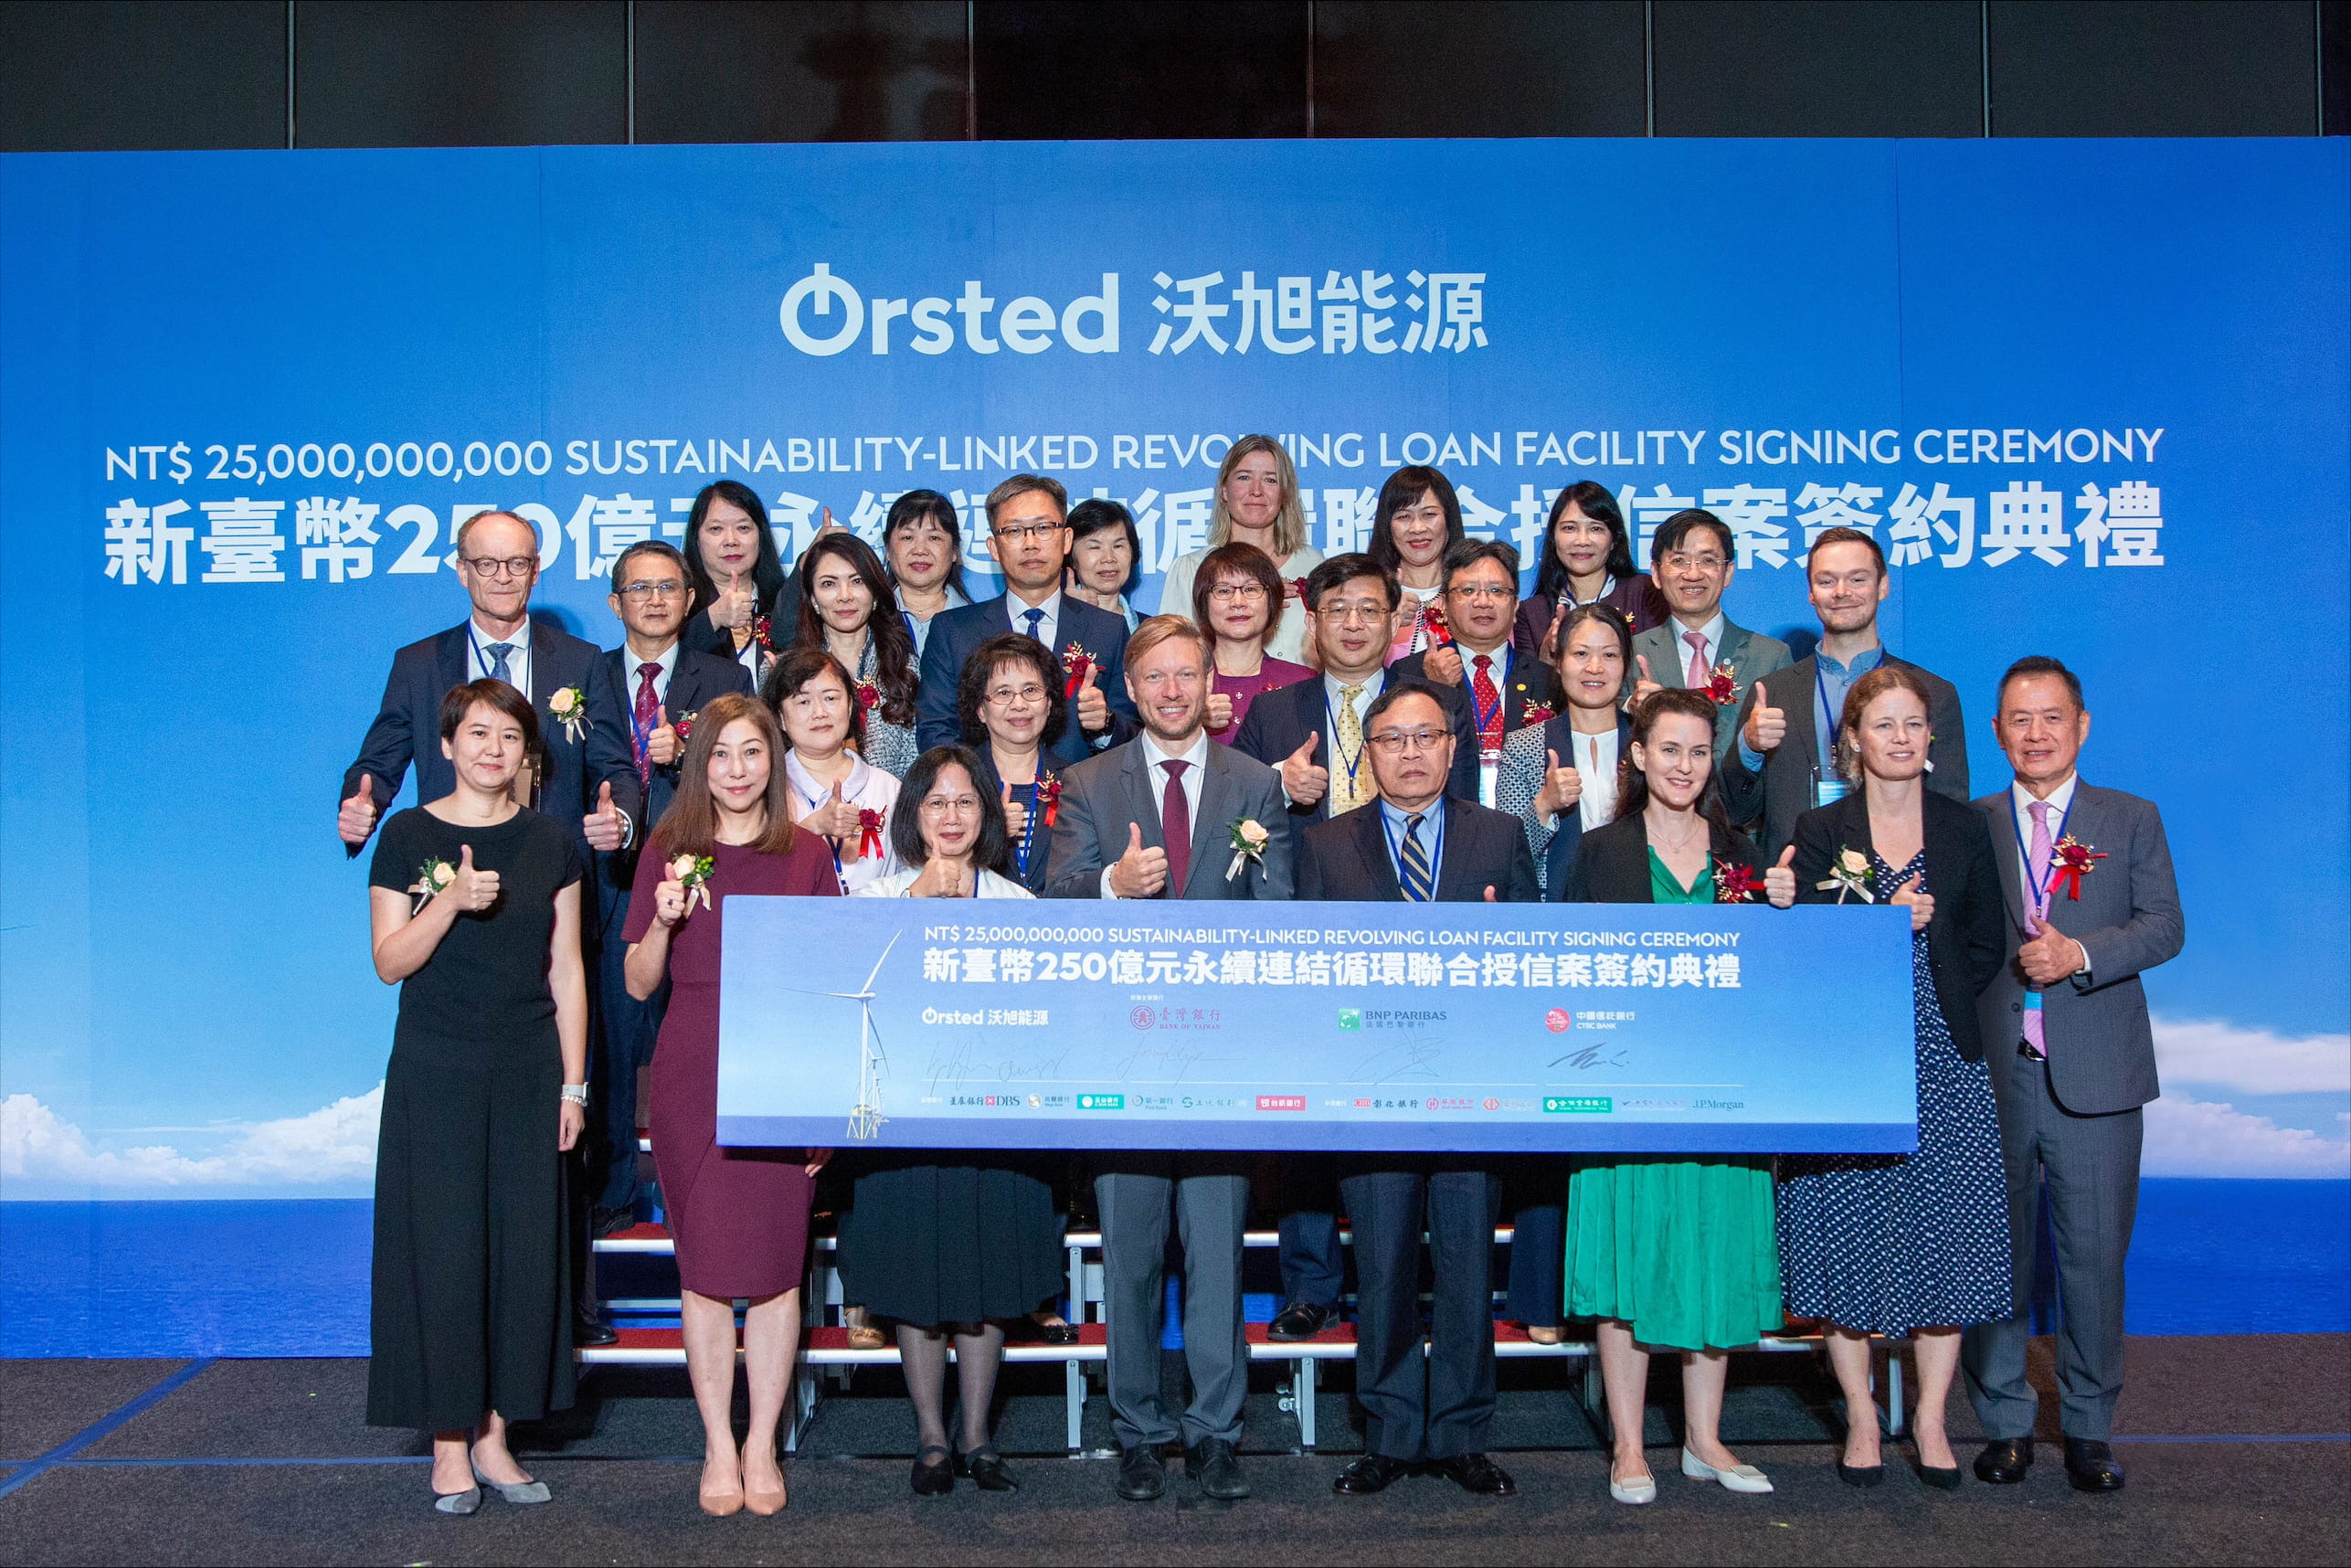 Guaranteed by Ørsted A/S, the sustainability-linked revolving loan facility has attracted oversubscription from both domestic and foreign banks, notably including all of Taiwan's state-owned banks.